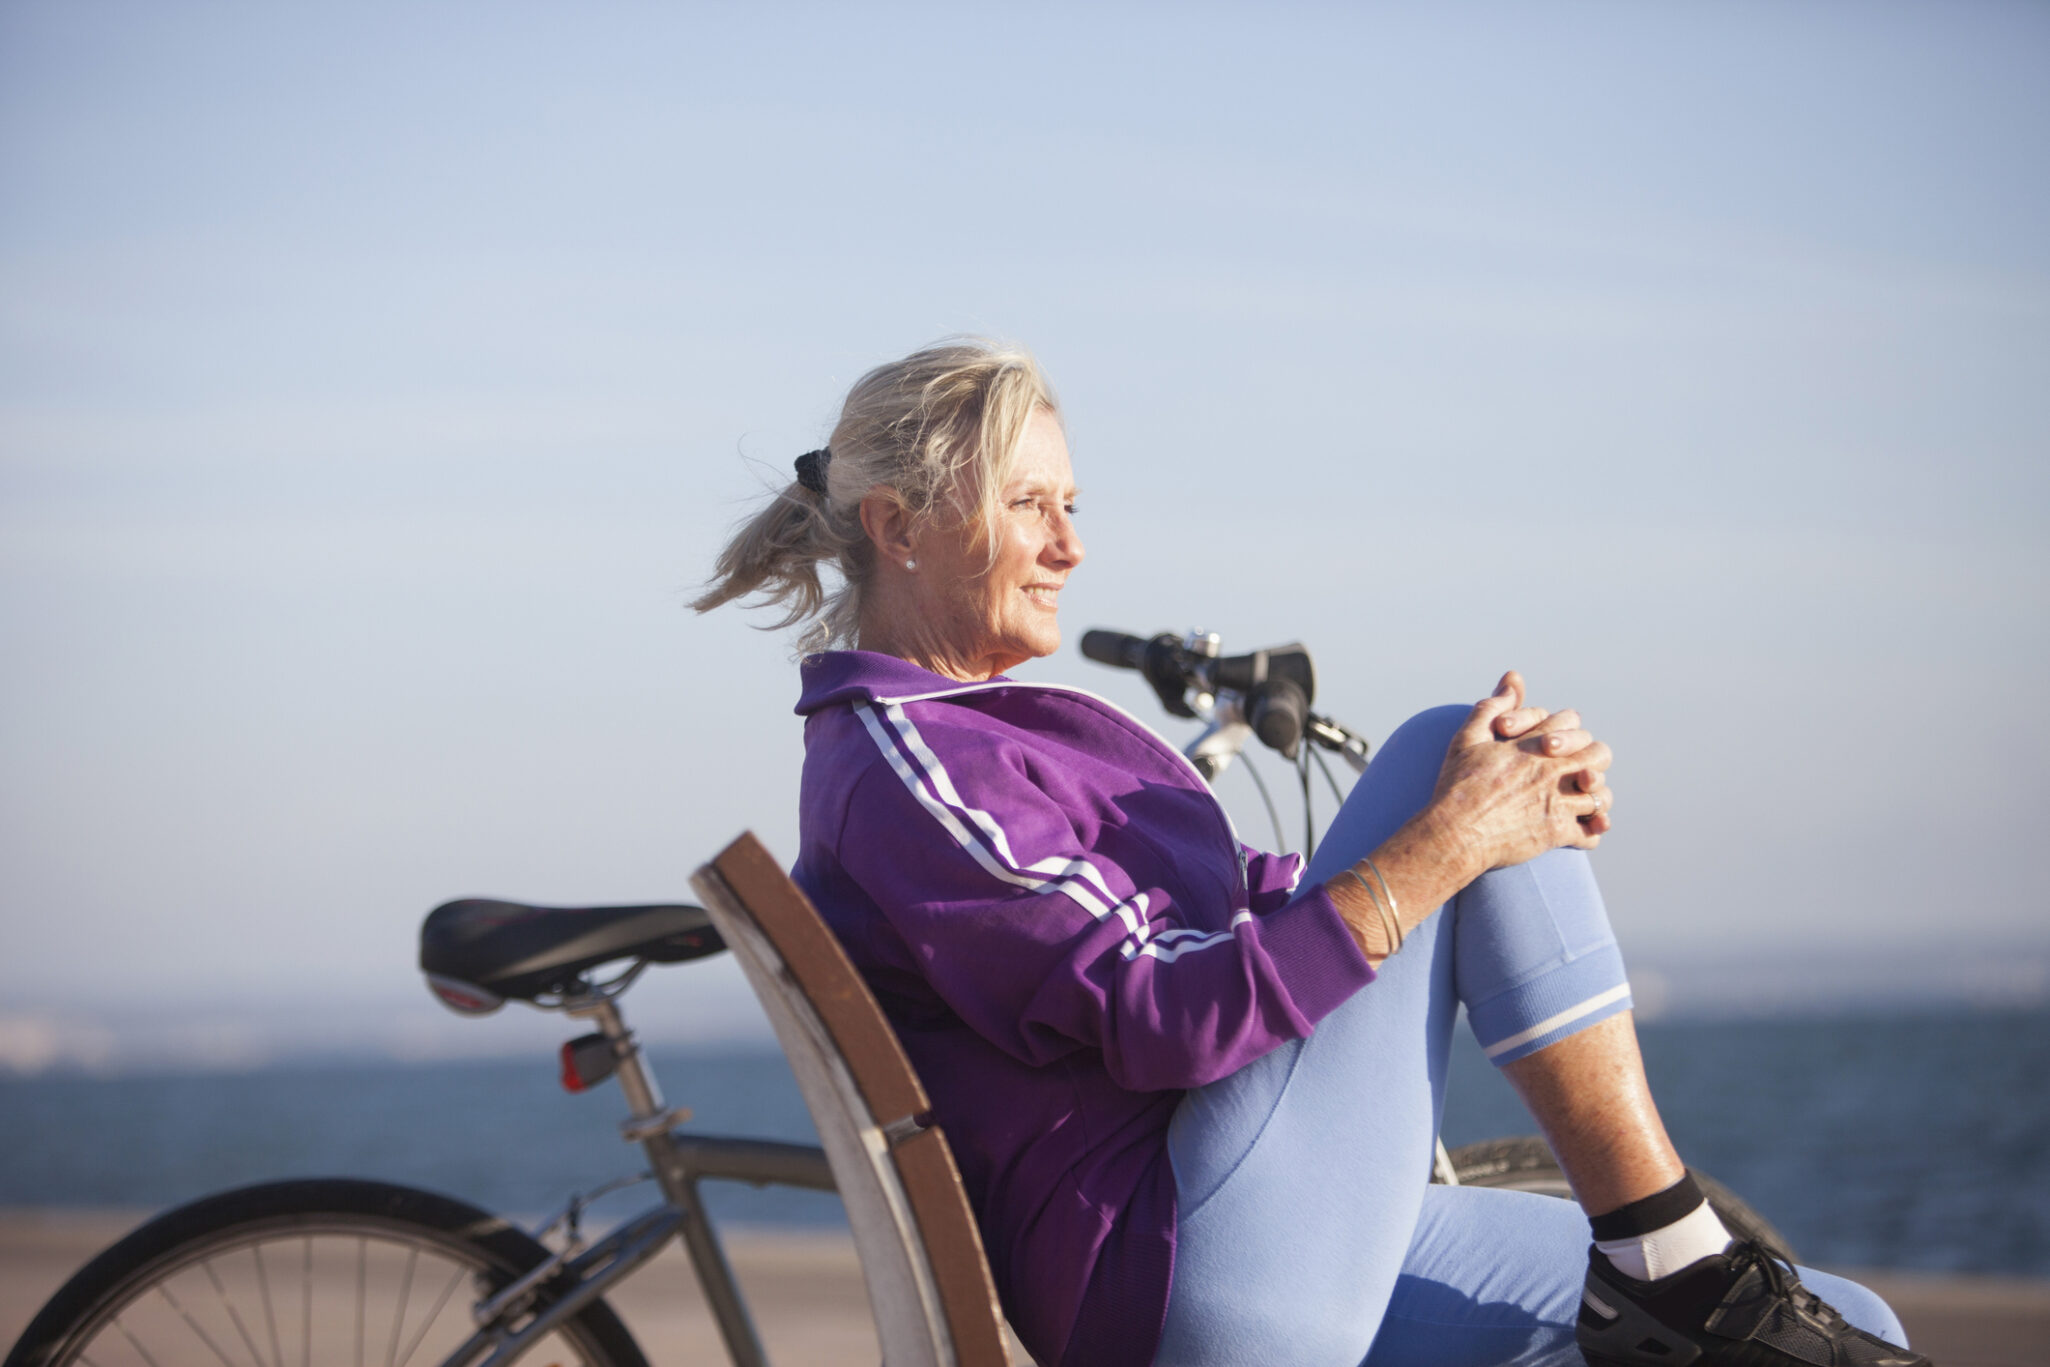 An older women takes a break from bike riding and sits on a beachside bench while holding one knee